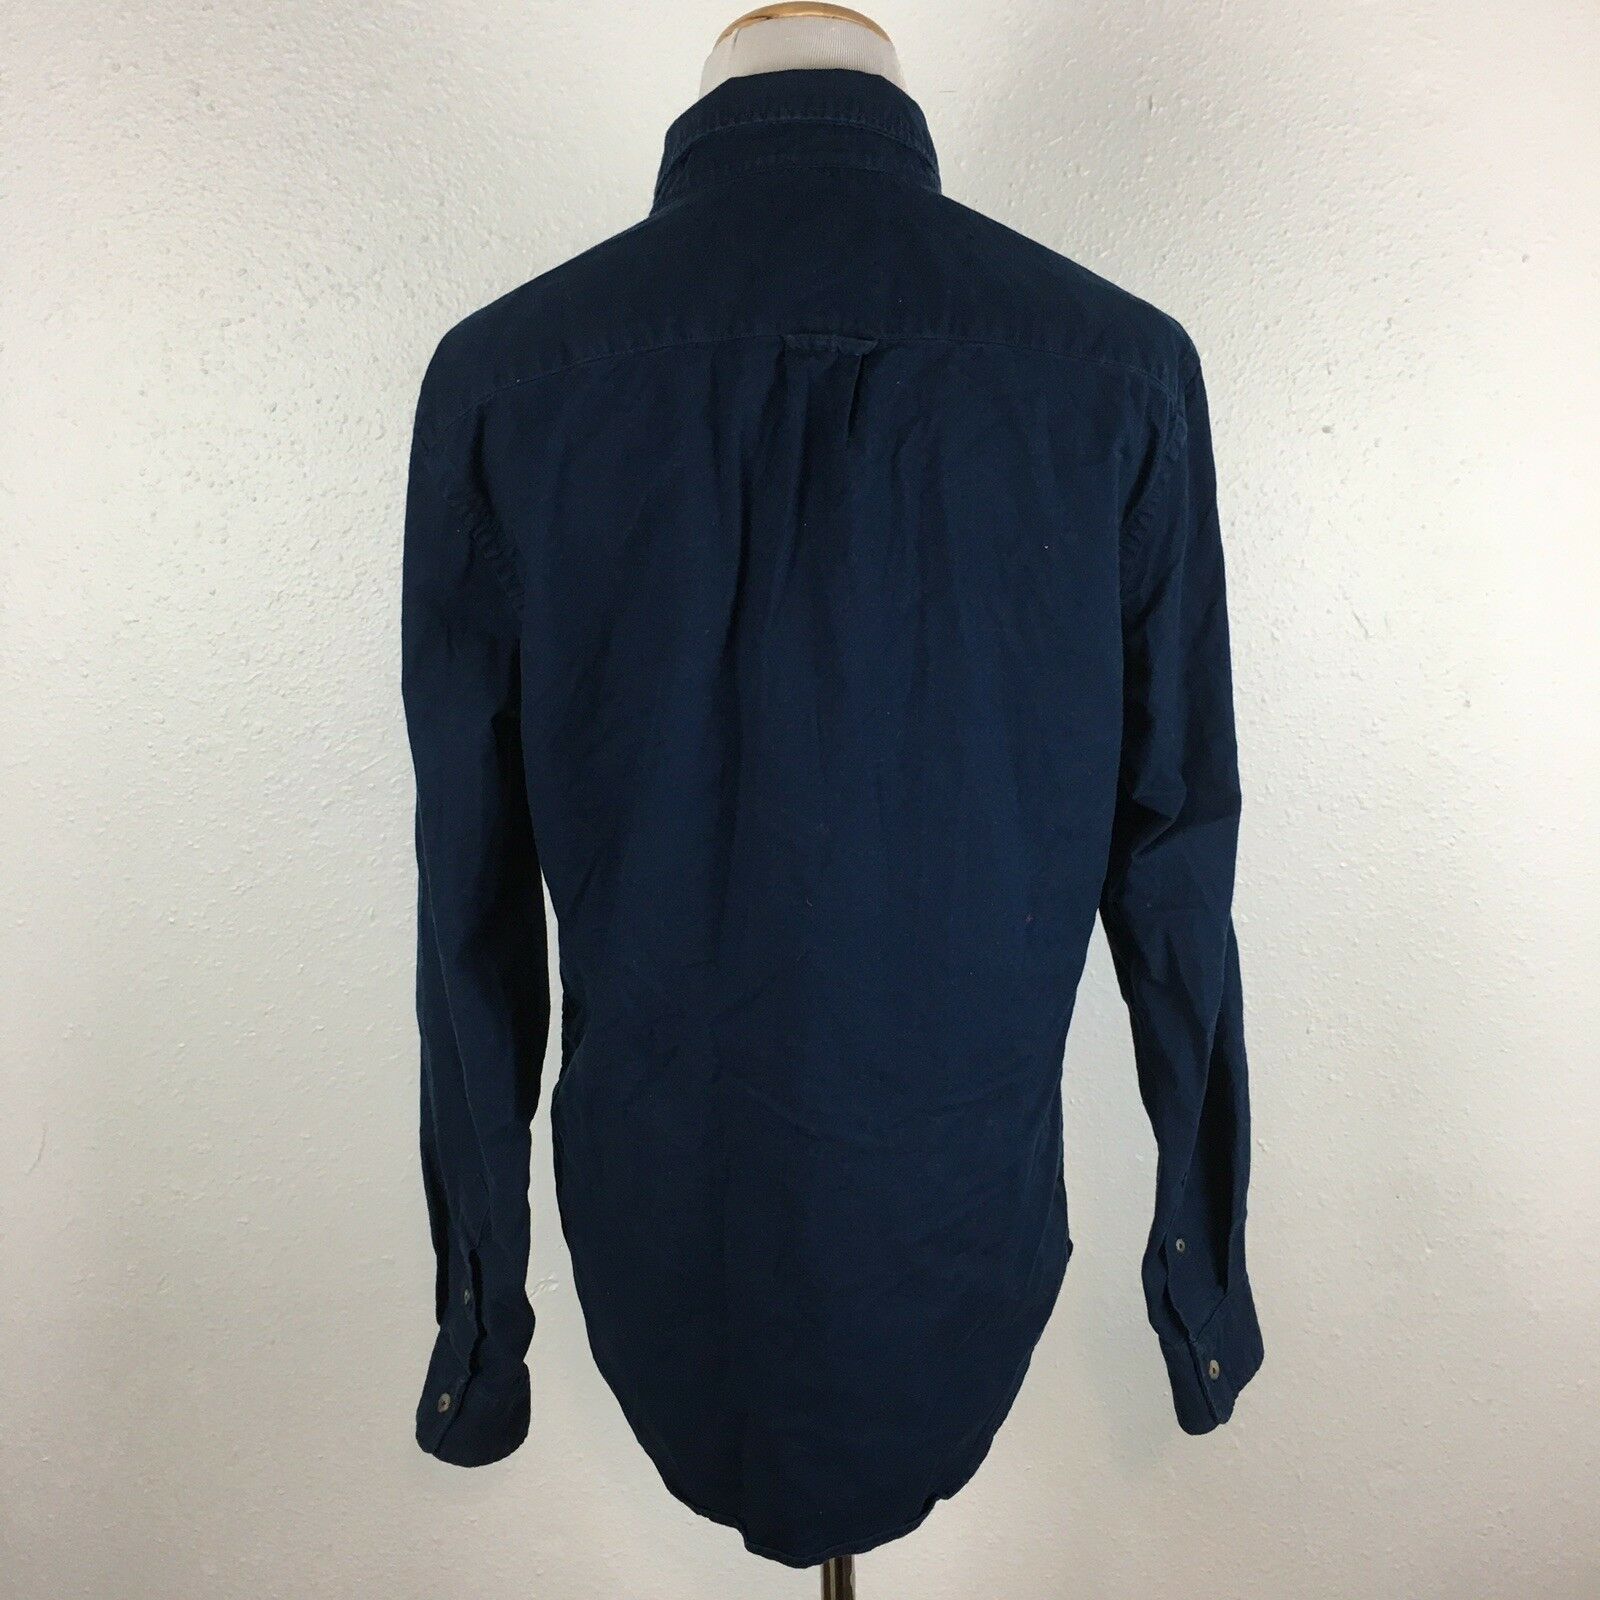 Old Navy Women's The Oxford Shirt Navy Blue Slim Fit Button Front Size ...